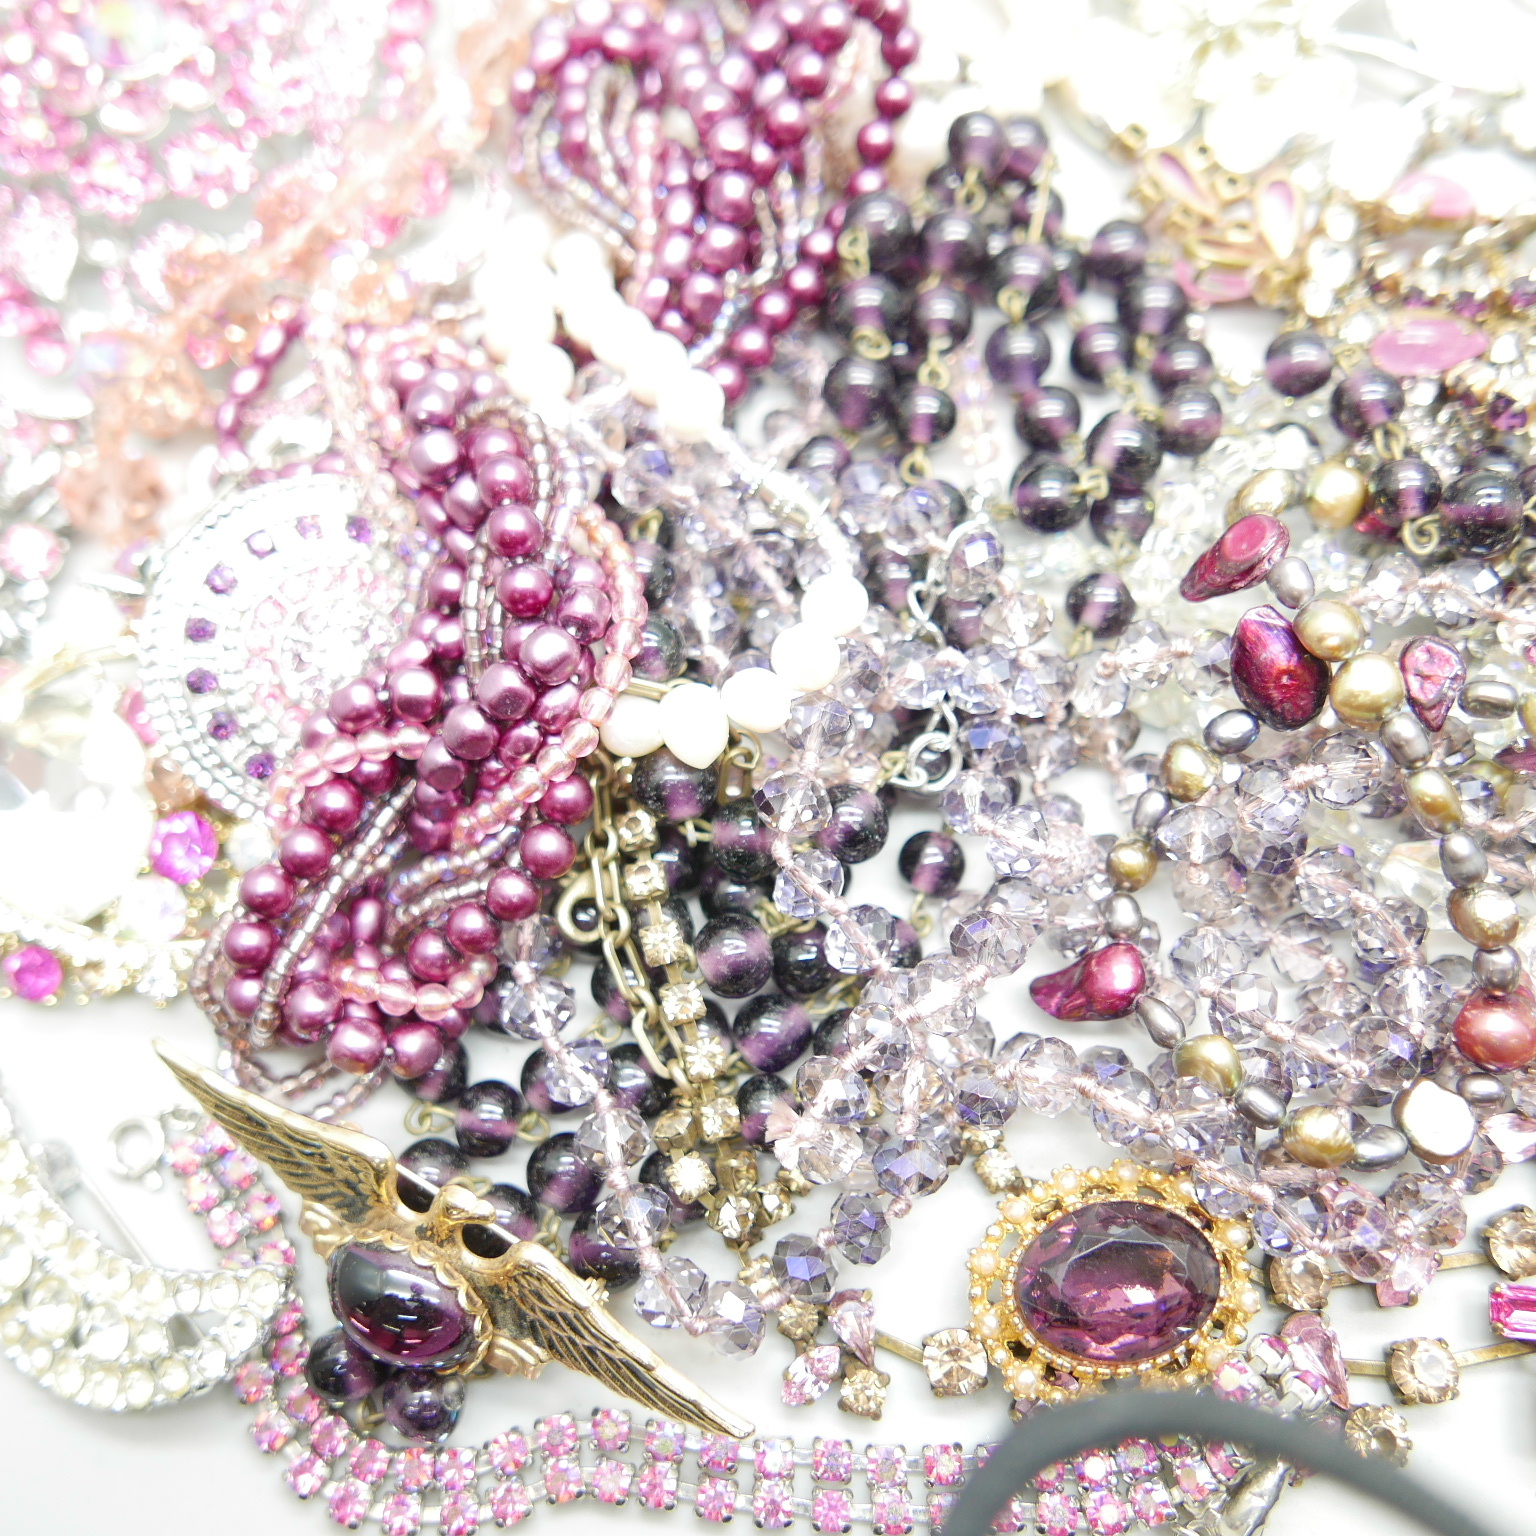 Vintage costume jewellery including coloured pearls and diamante - Image 2 of 3